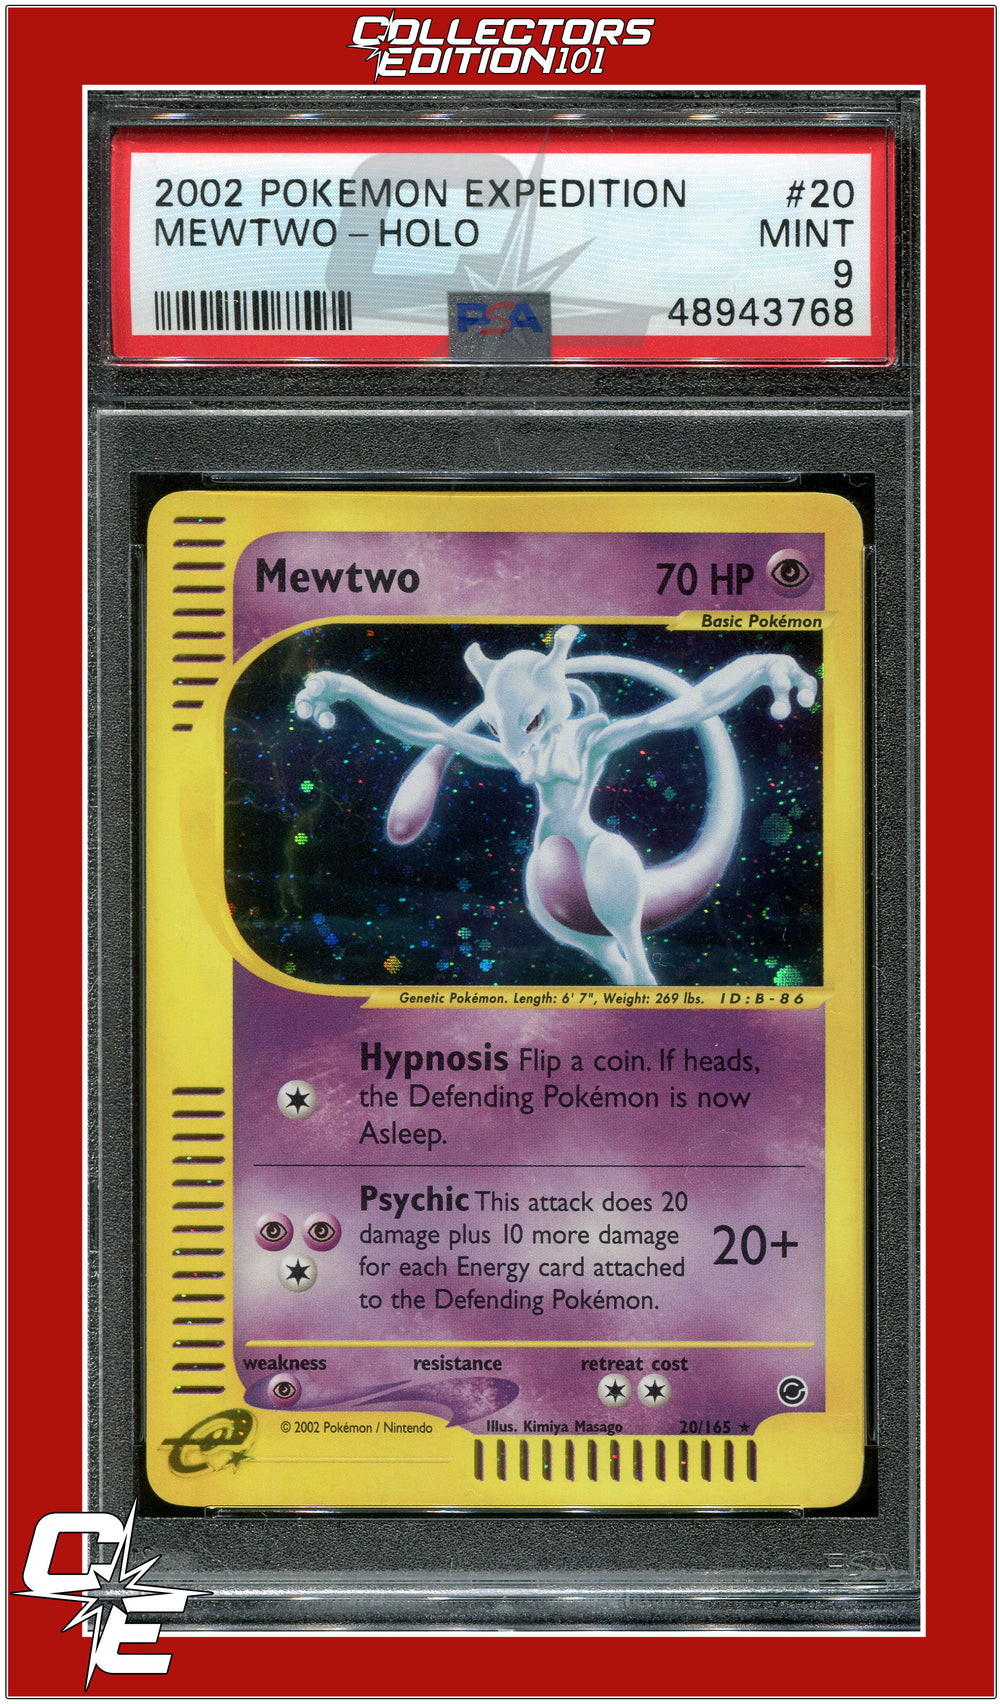 Expedition 20 Mewtwo Holo PSA 9